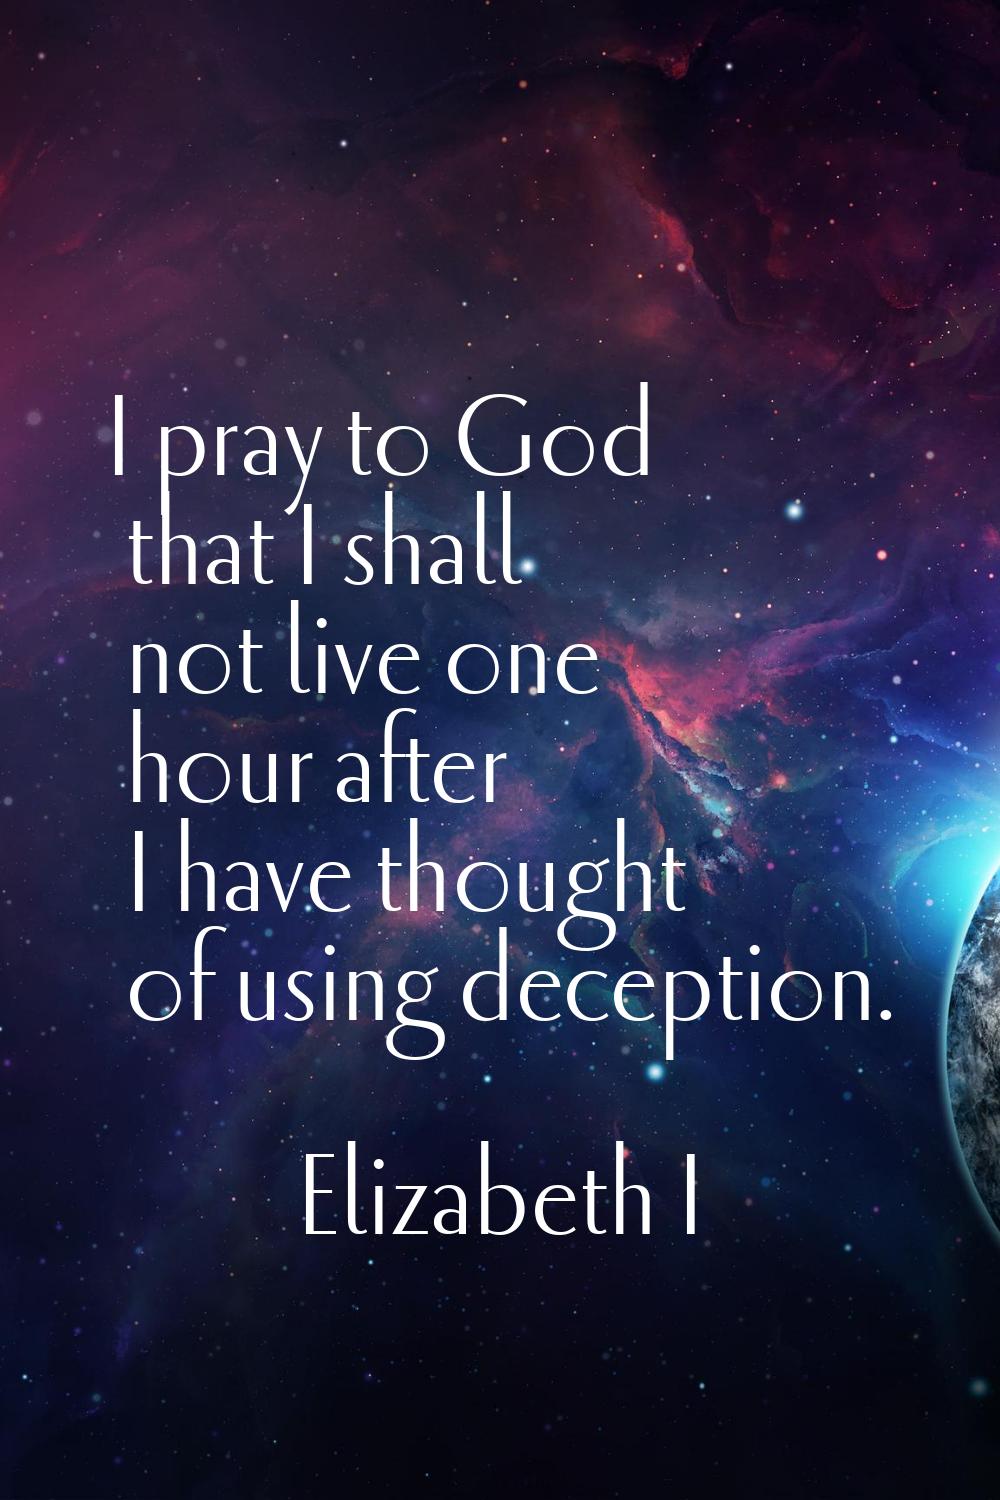 I pray to God that I shall not live one hour after I have thought of using deception.